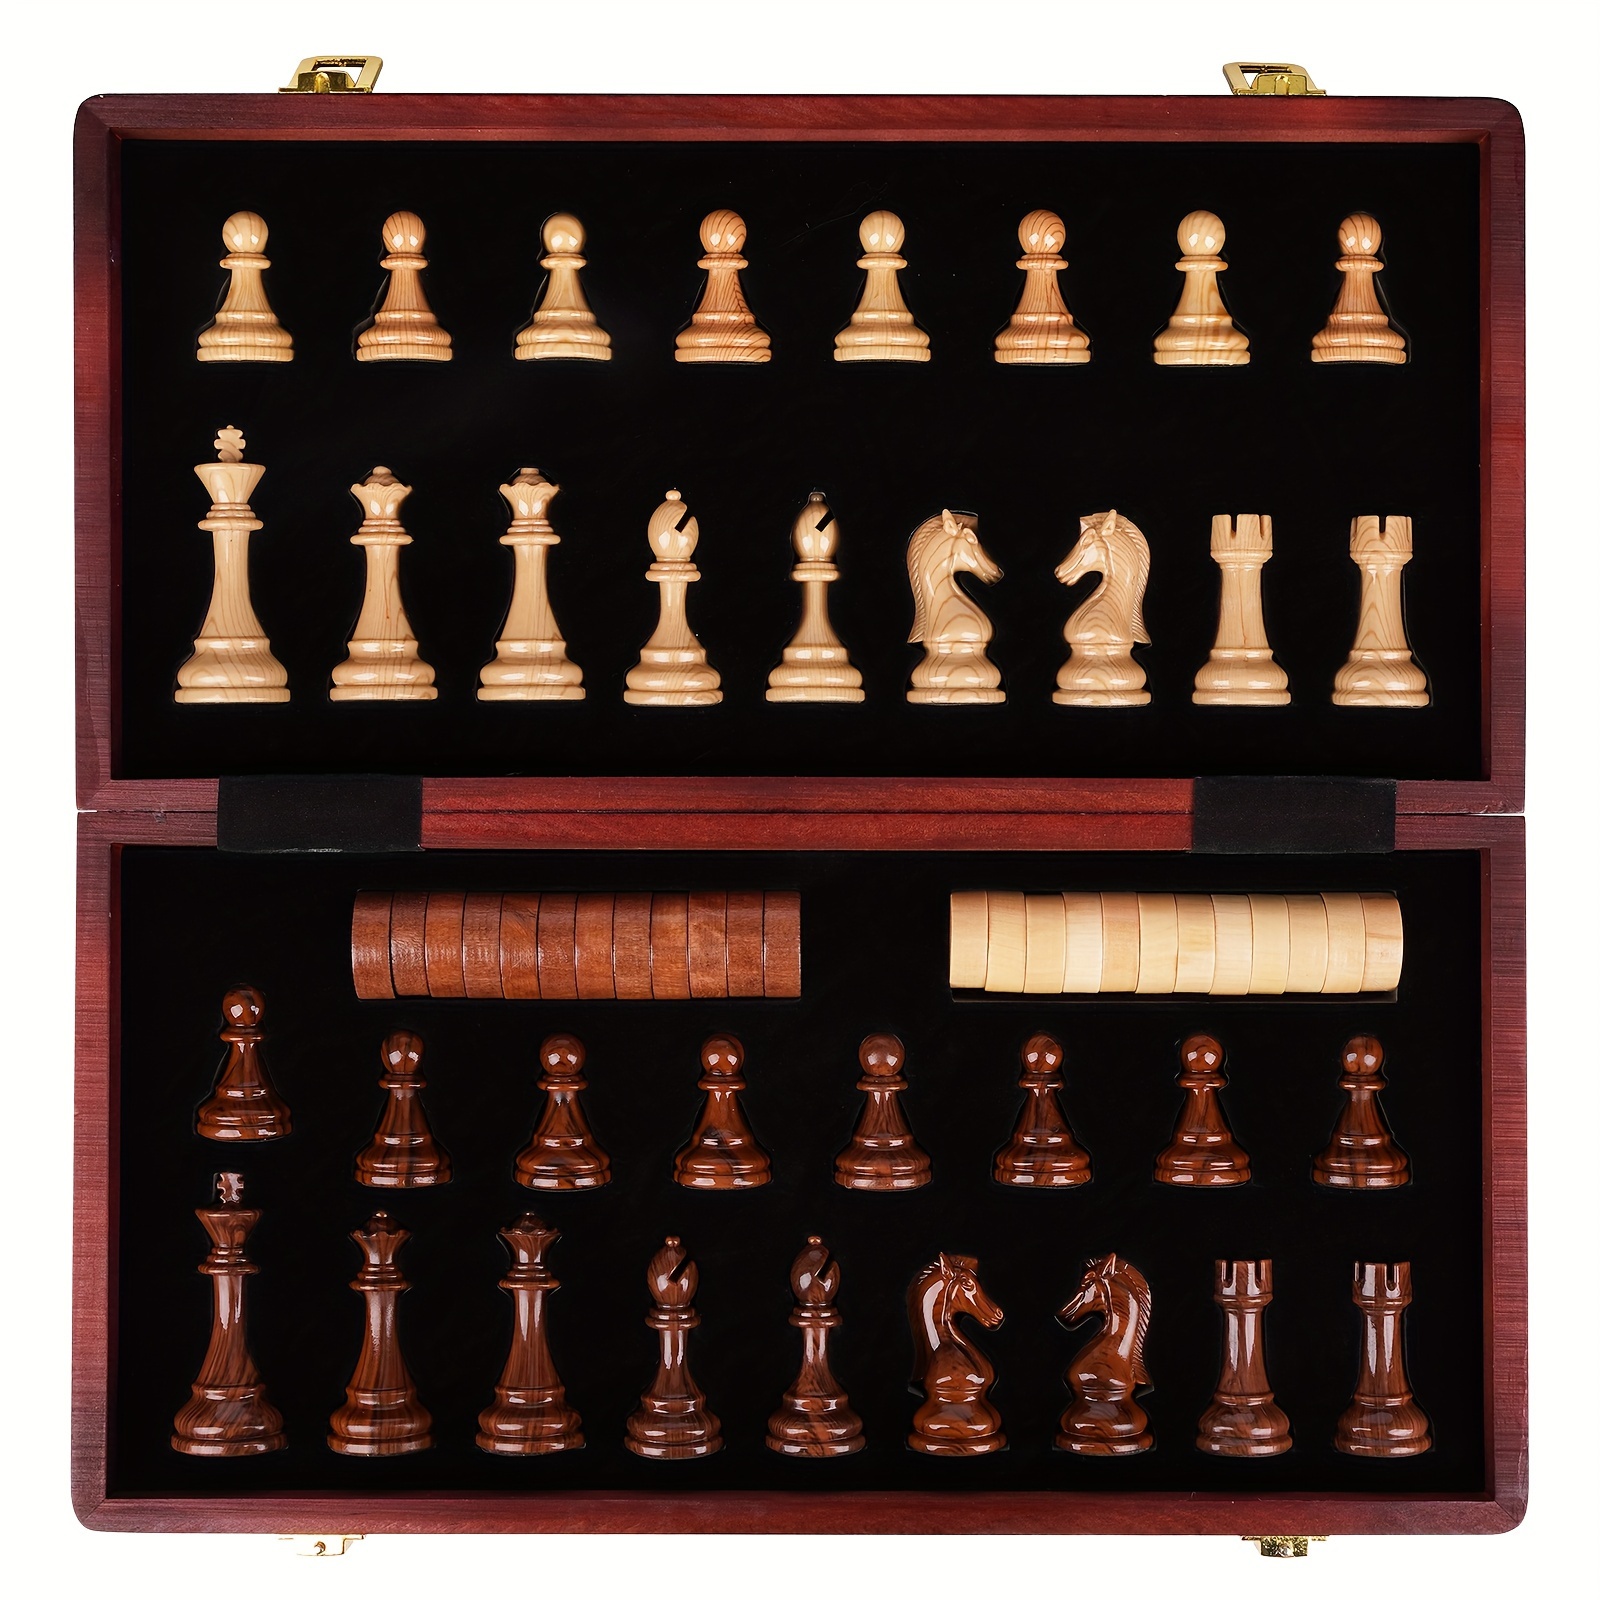 

2 In 1 Acrylic+metal Chess And Set 15"travel Portable Chess Set For Adults Including 24 Wooden Checkers, Complete Chess Pieces Folding Wooden Chess Board Set - Durable Chess Sets